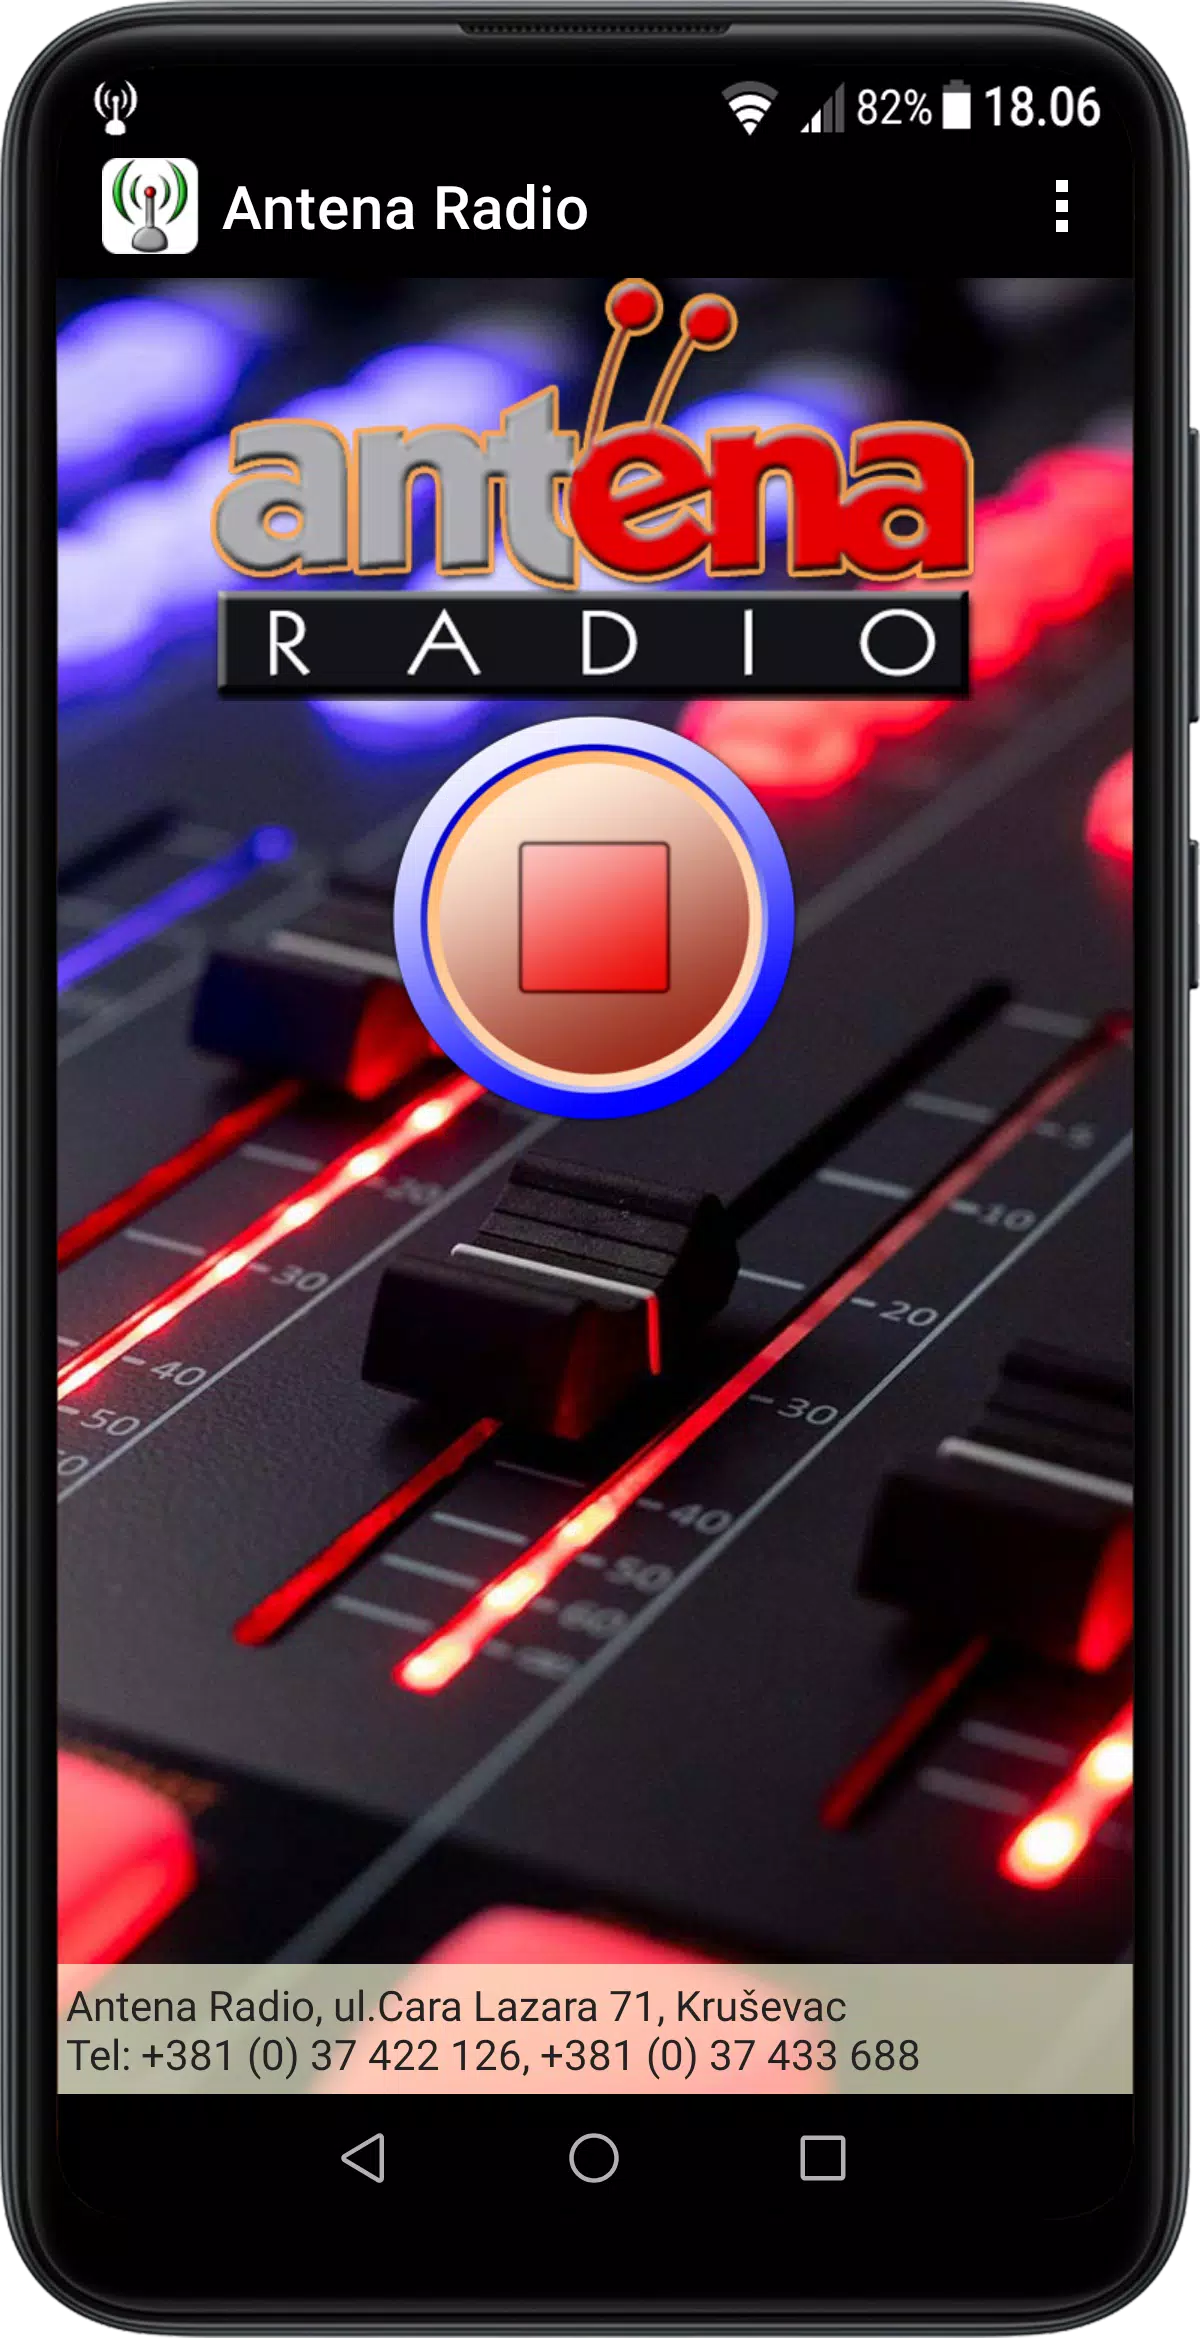 Antena Radio for Android - APK Download